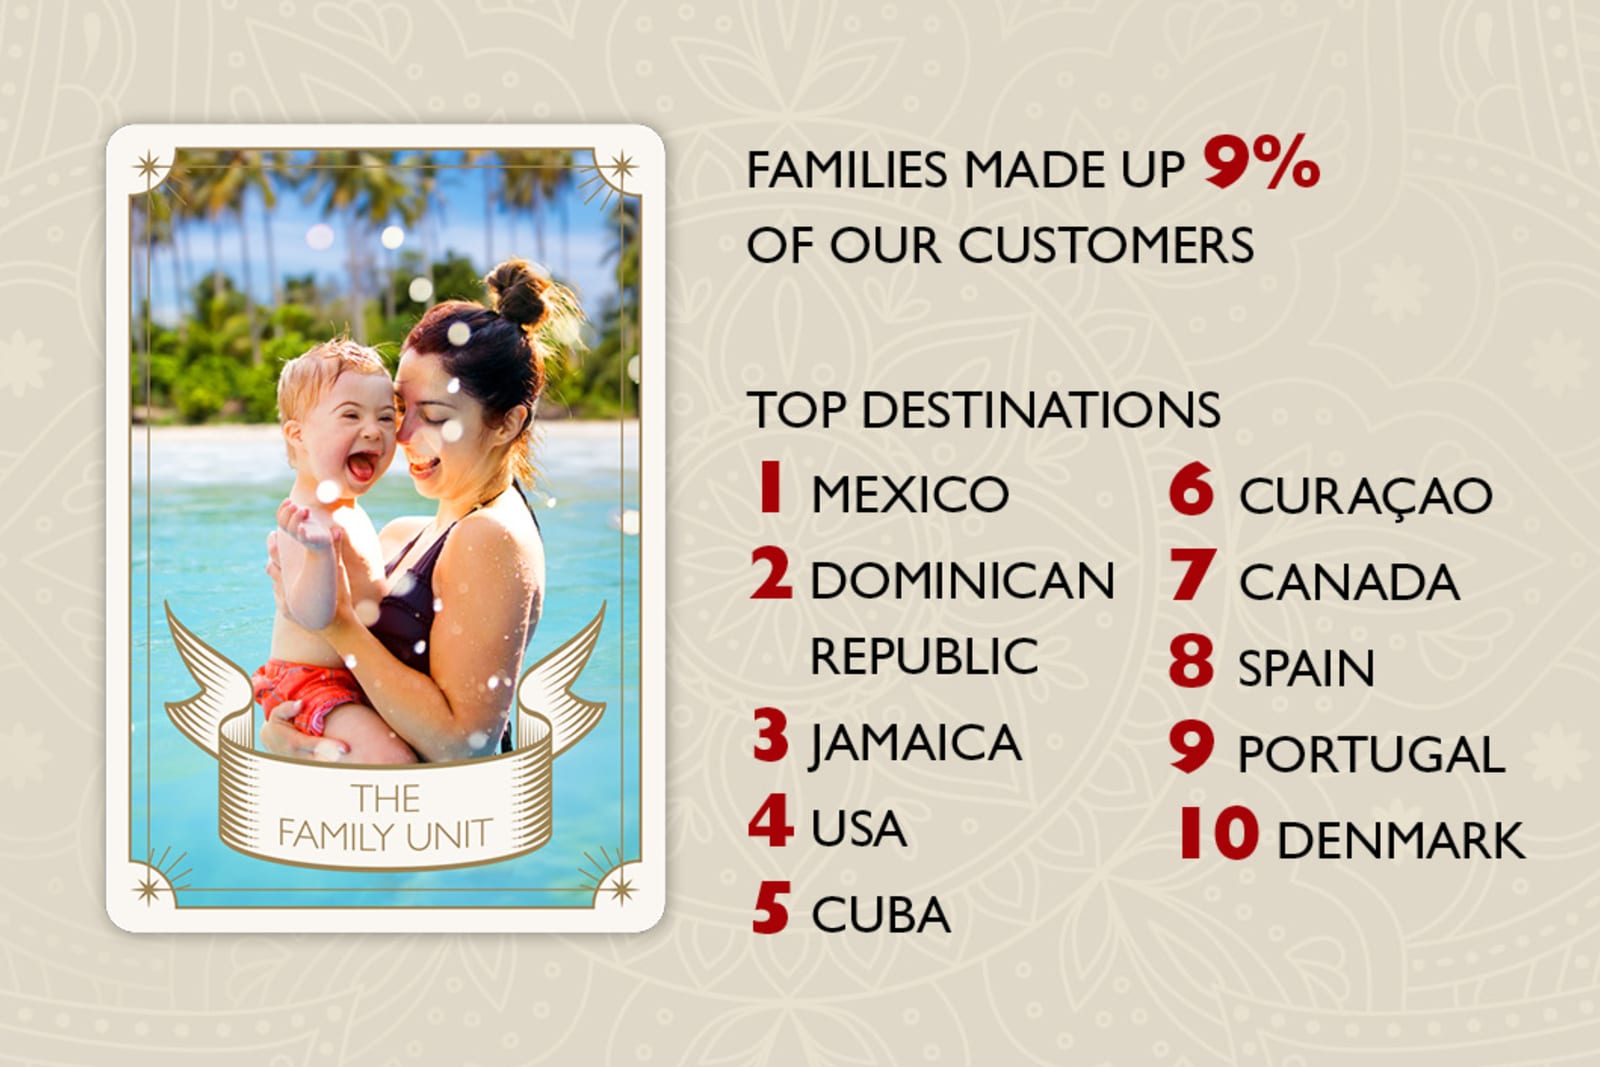 Families primarily travelled to destinations with all-inclusive resorts